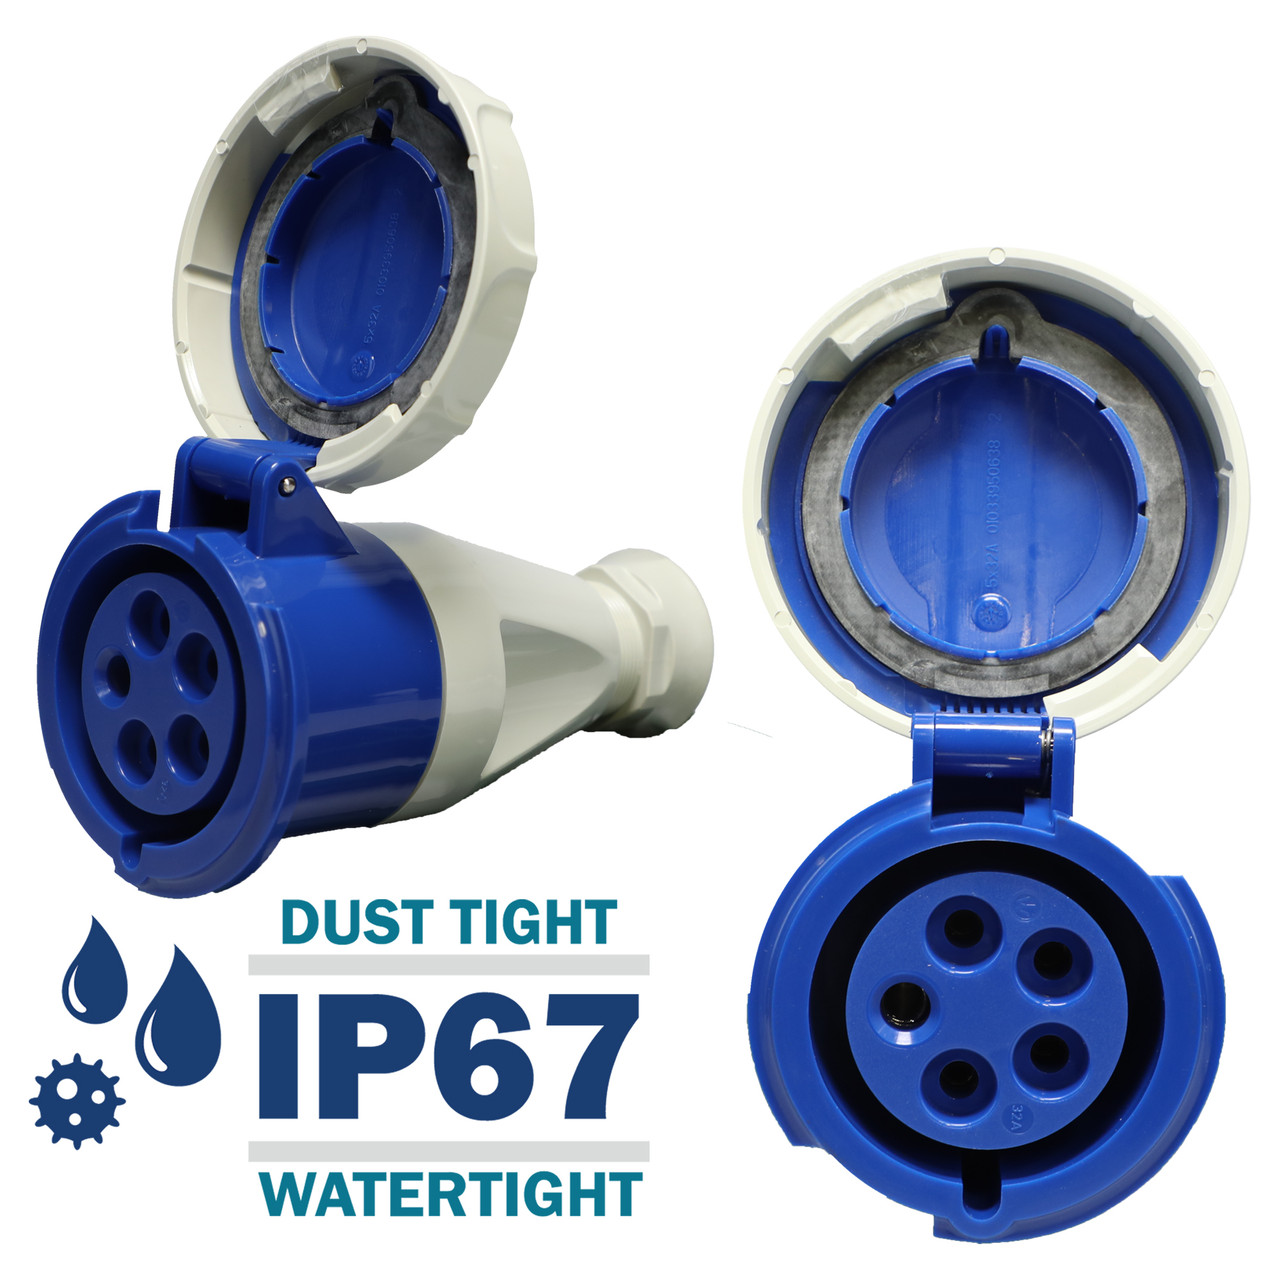 338509 Connector carries an environmental rating of IP67 Watertight